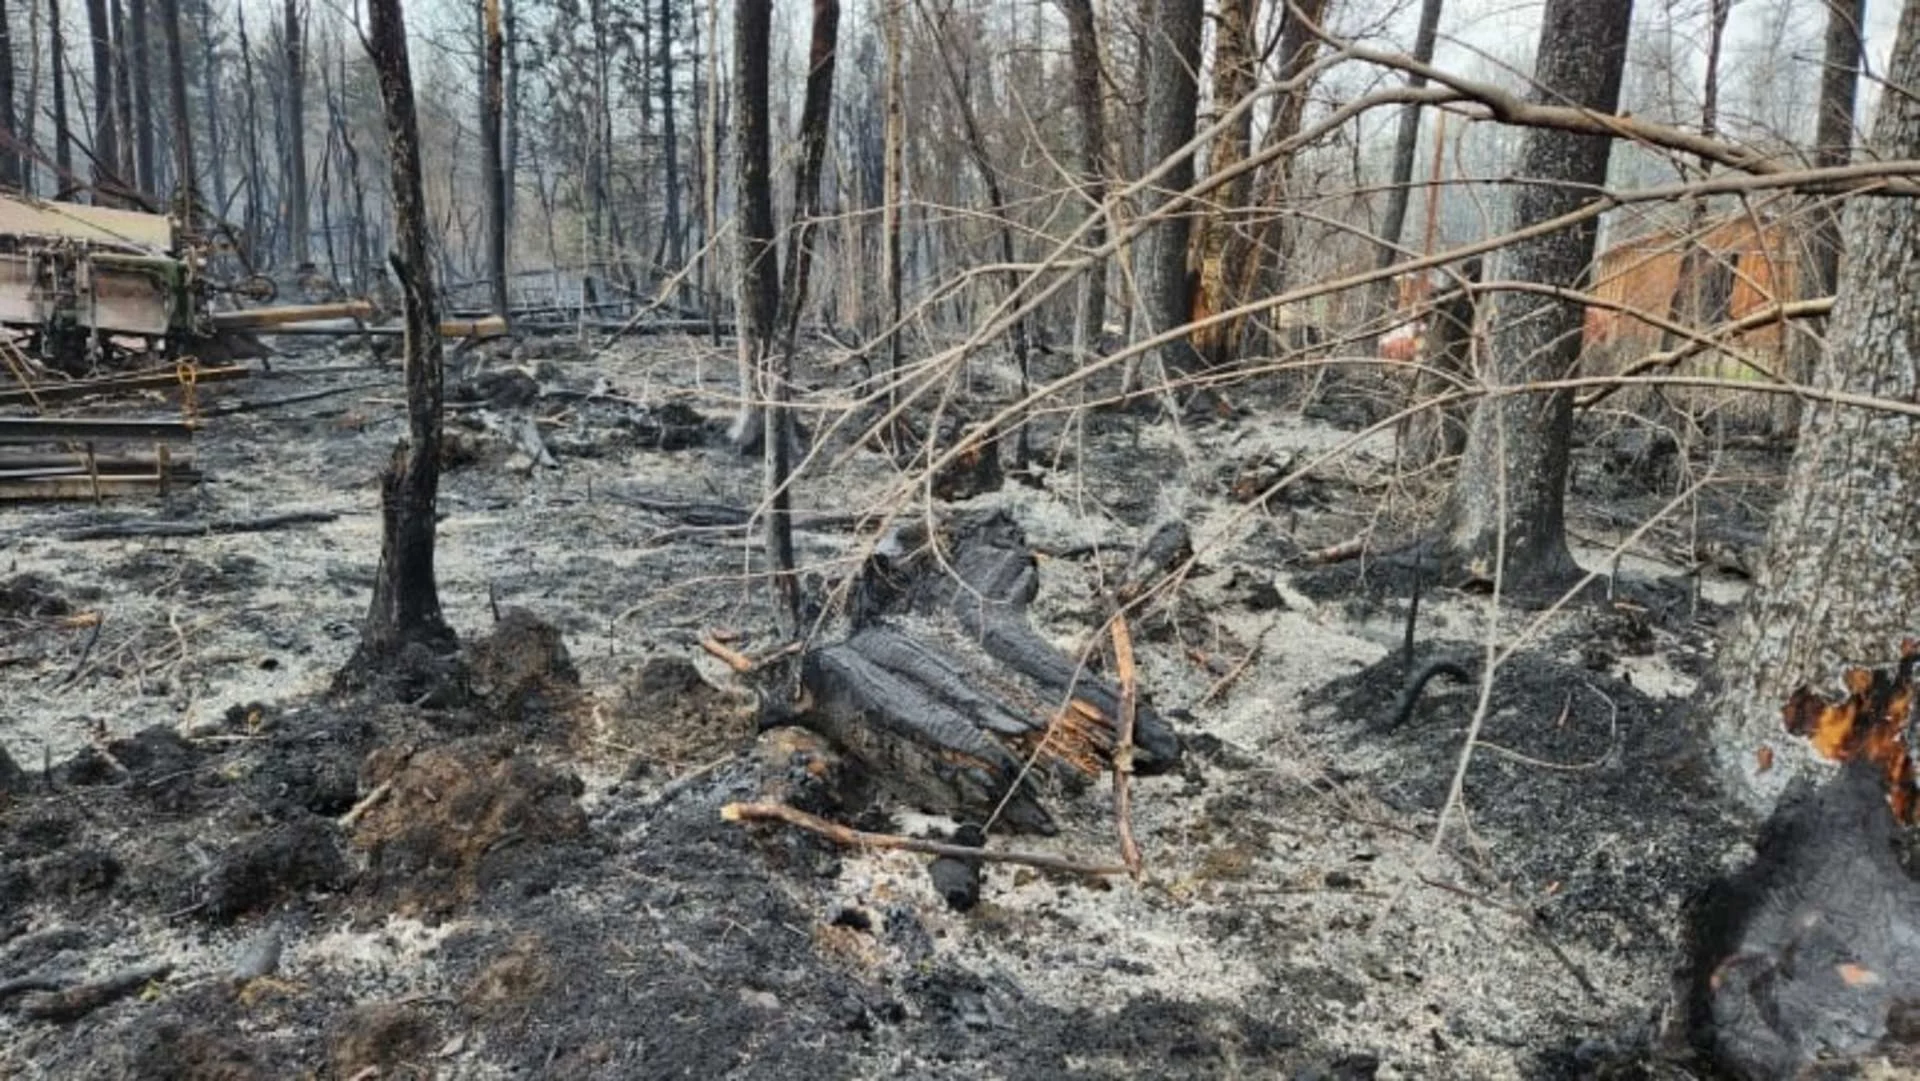 As Alberta's record fire season ends, planning begins for next year's fight